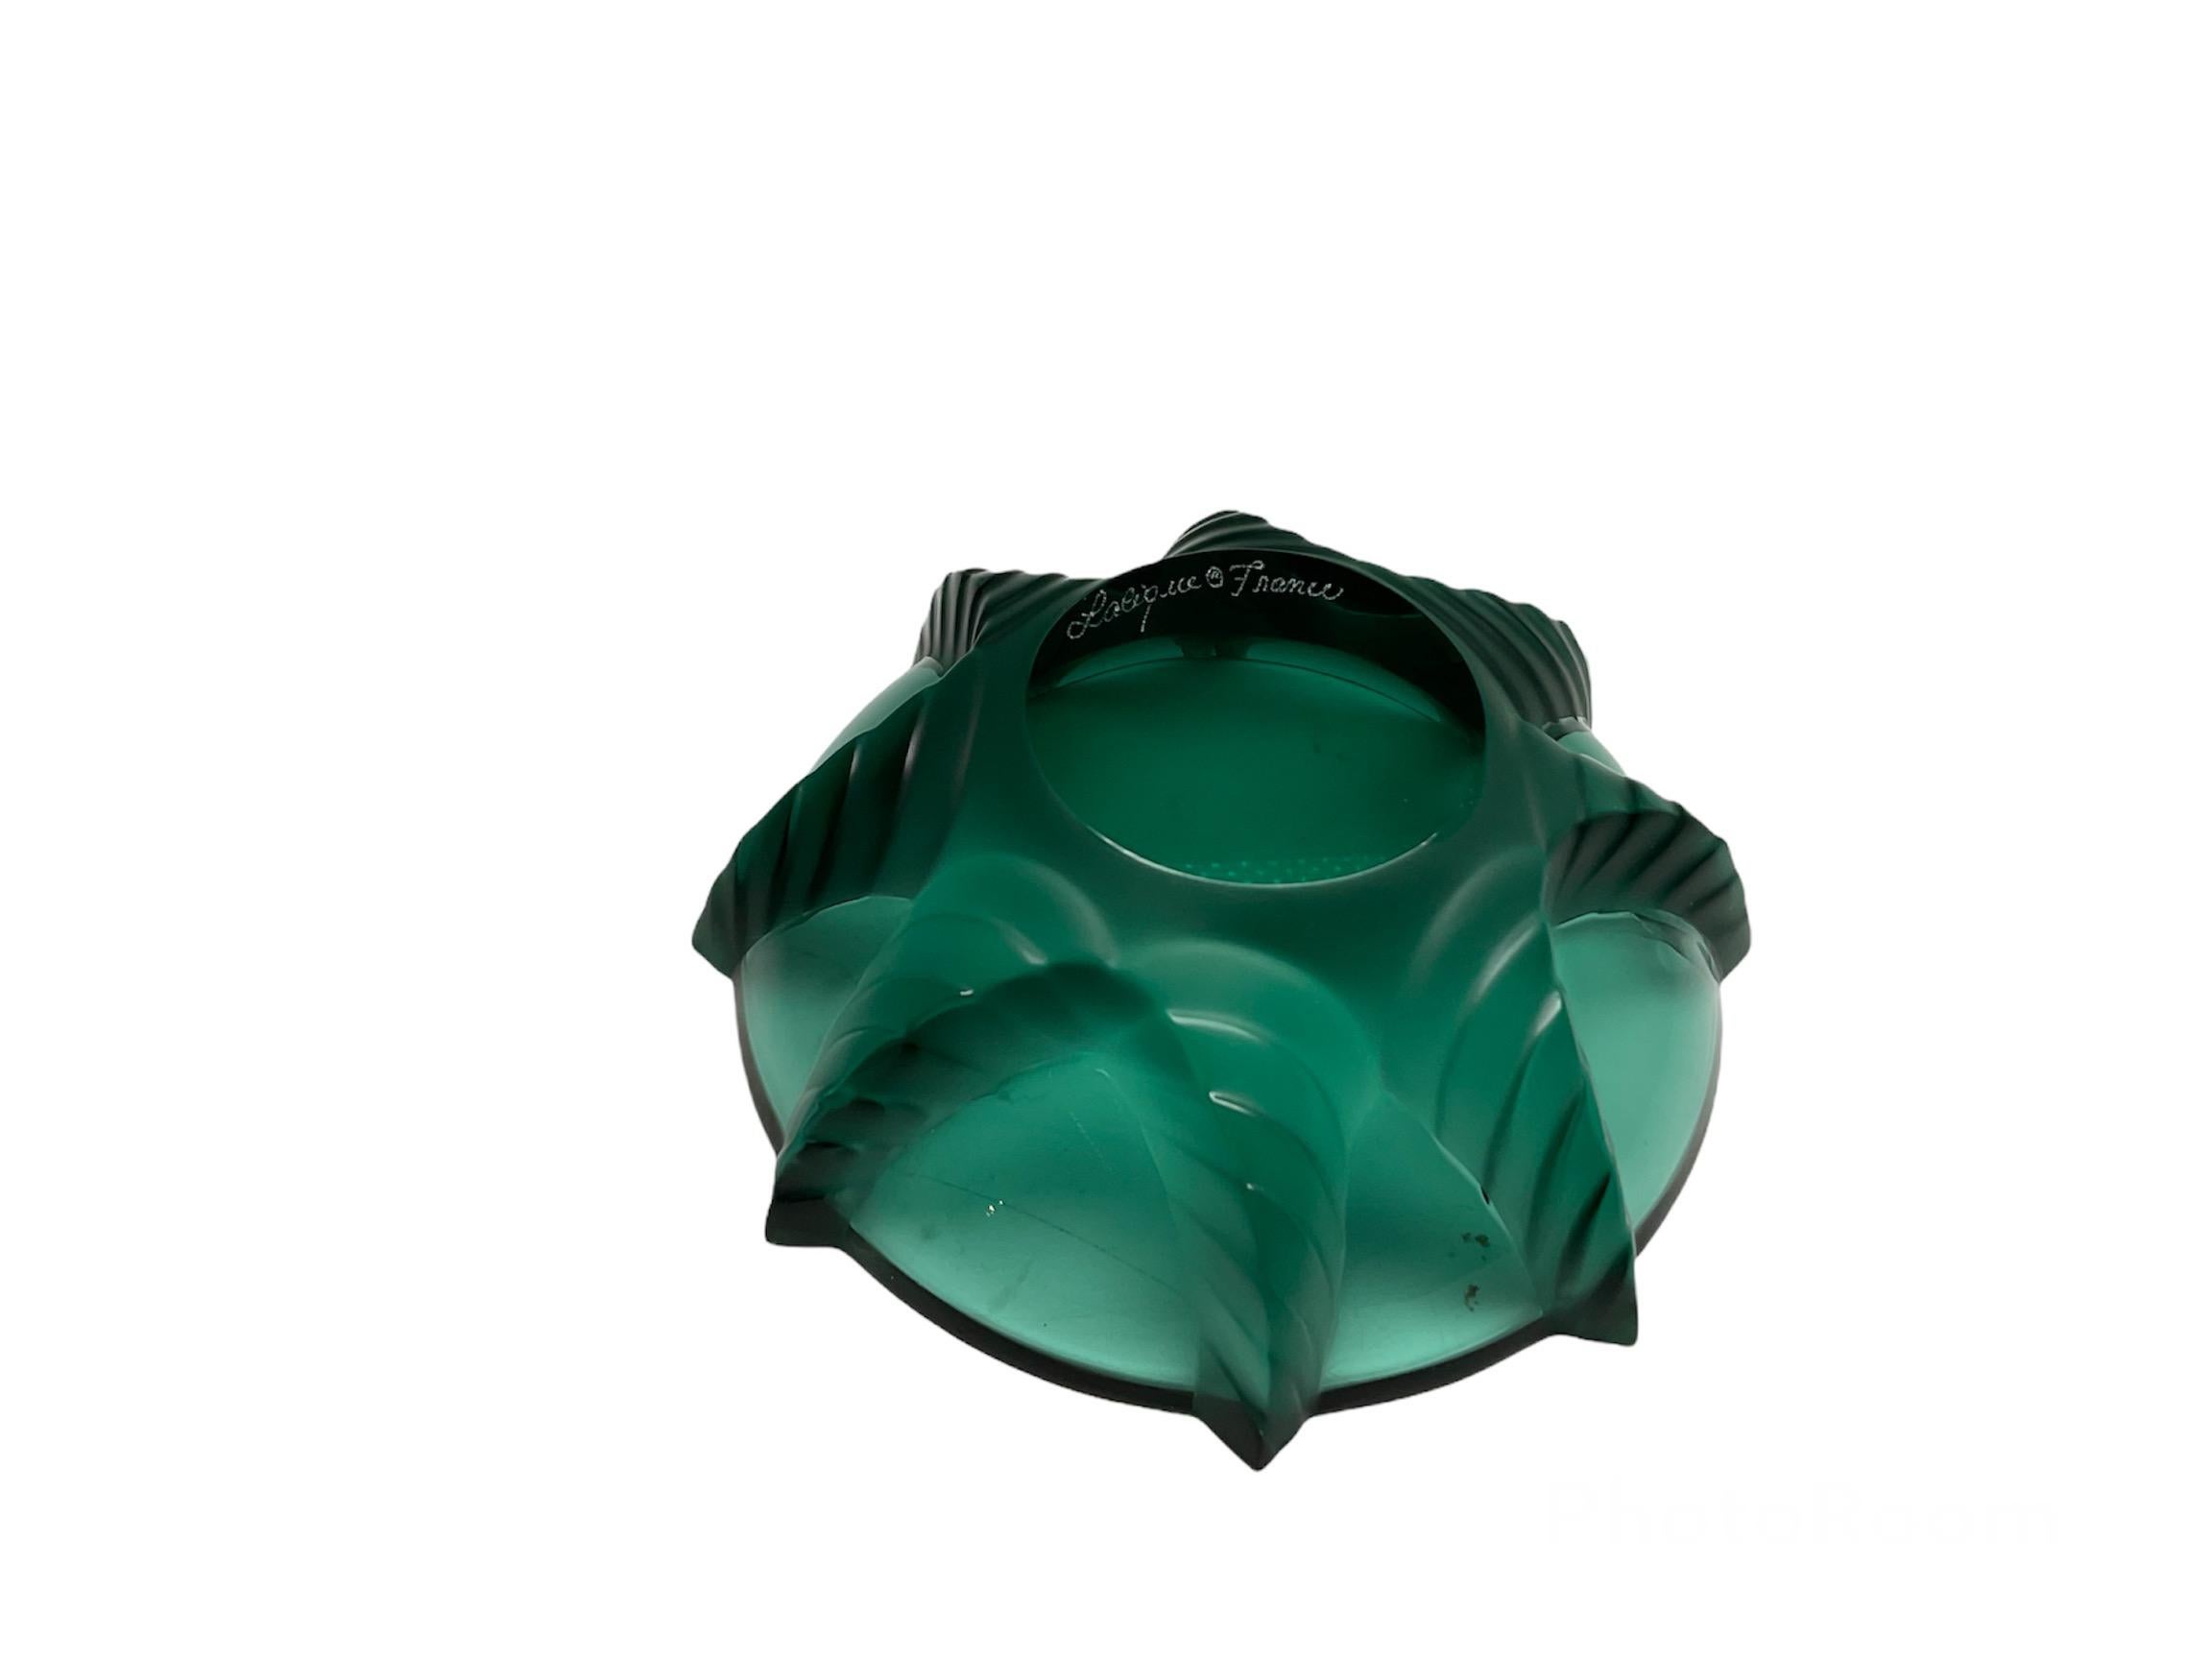 This is a Lalique Crystal green teal sea star small bowl. The engraved large sea star wraps up the bowl.